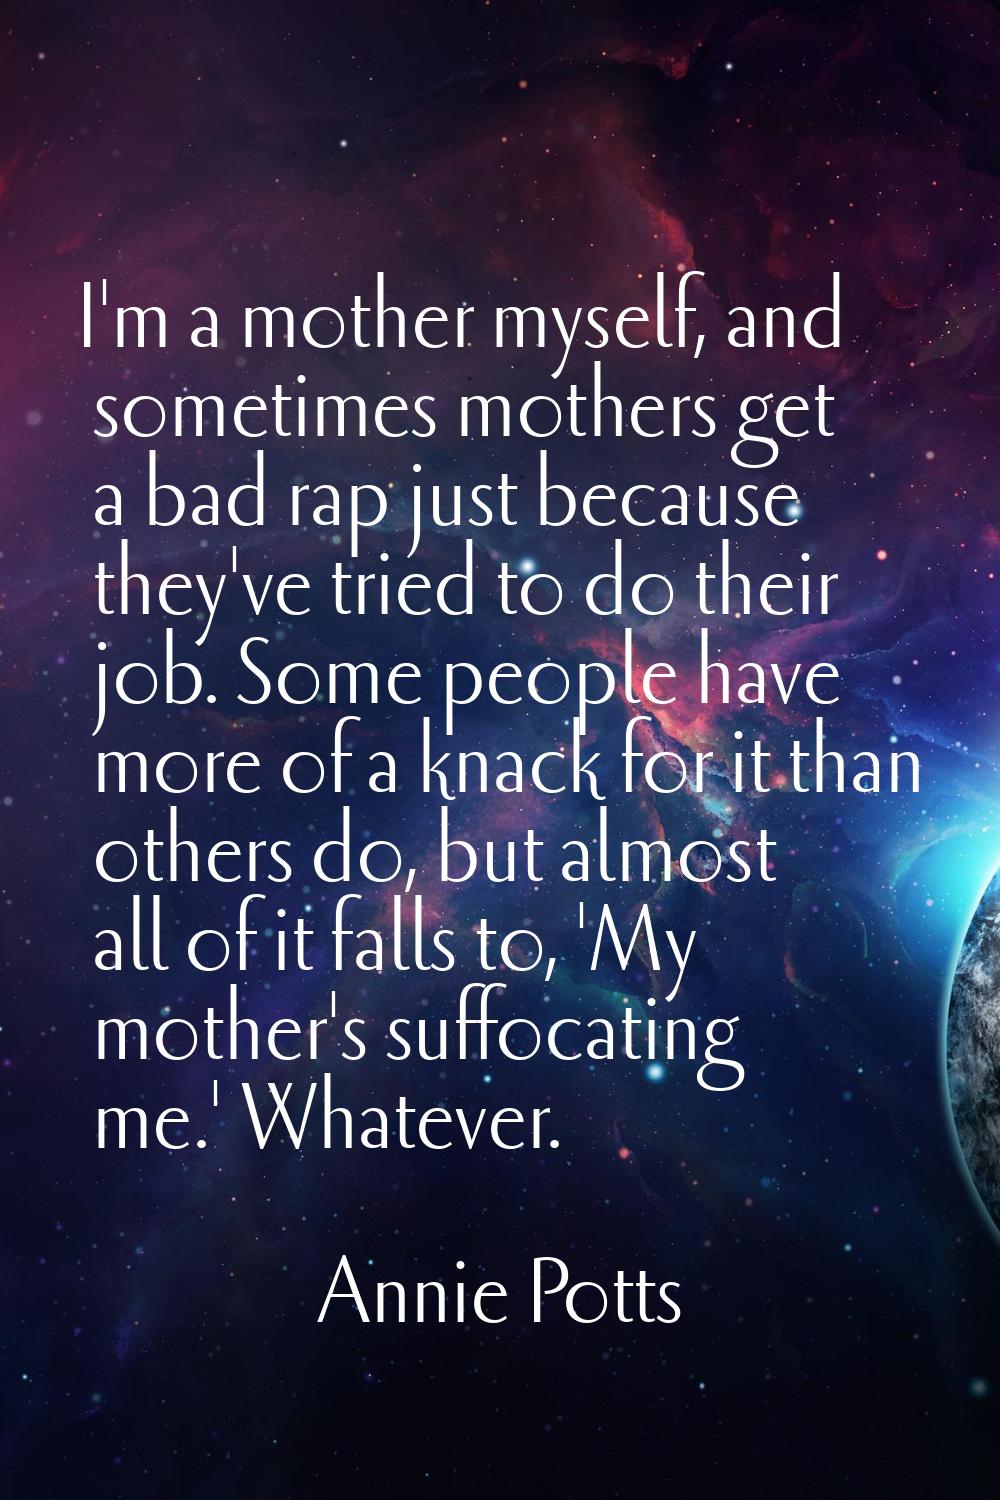 I'm a mother myself, and sometimes mothers get a bad rap just because they've tried to do their job